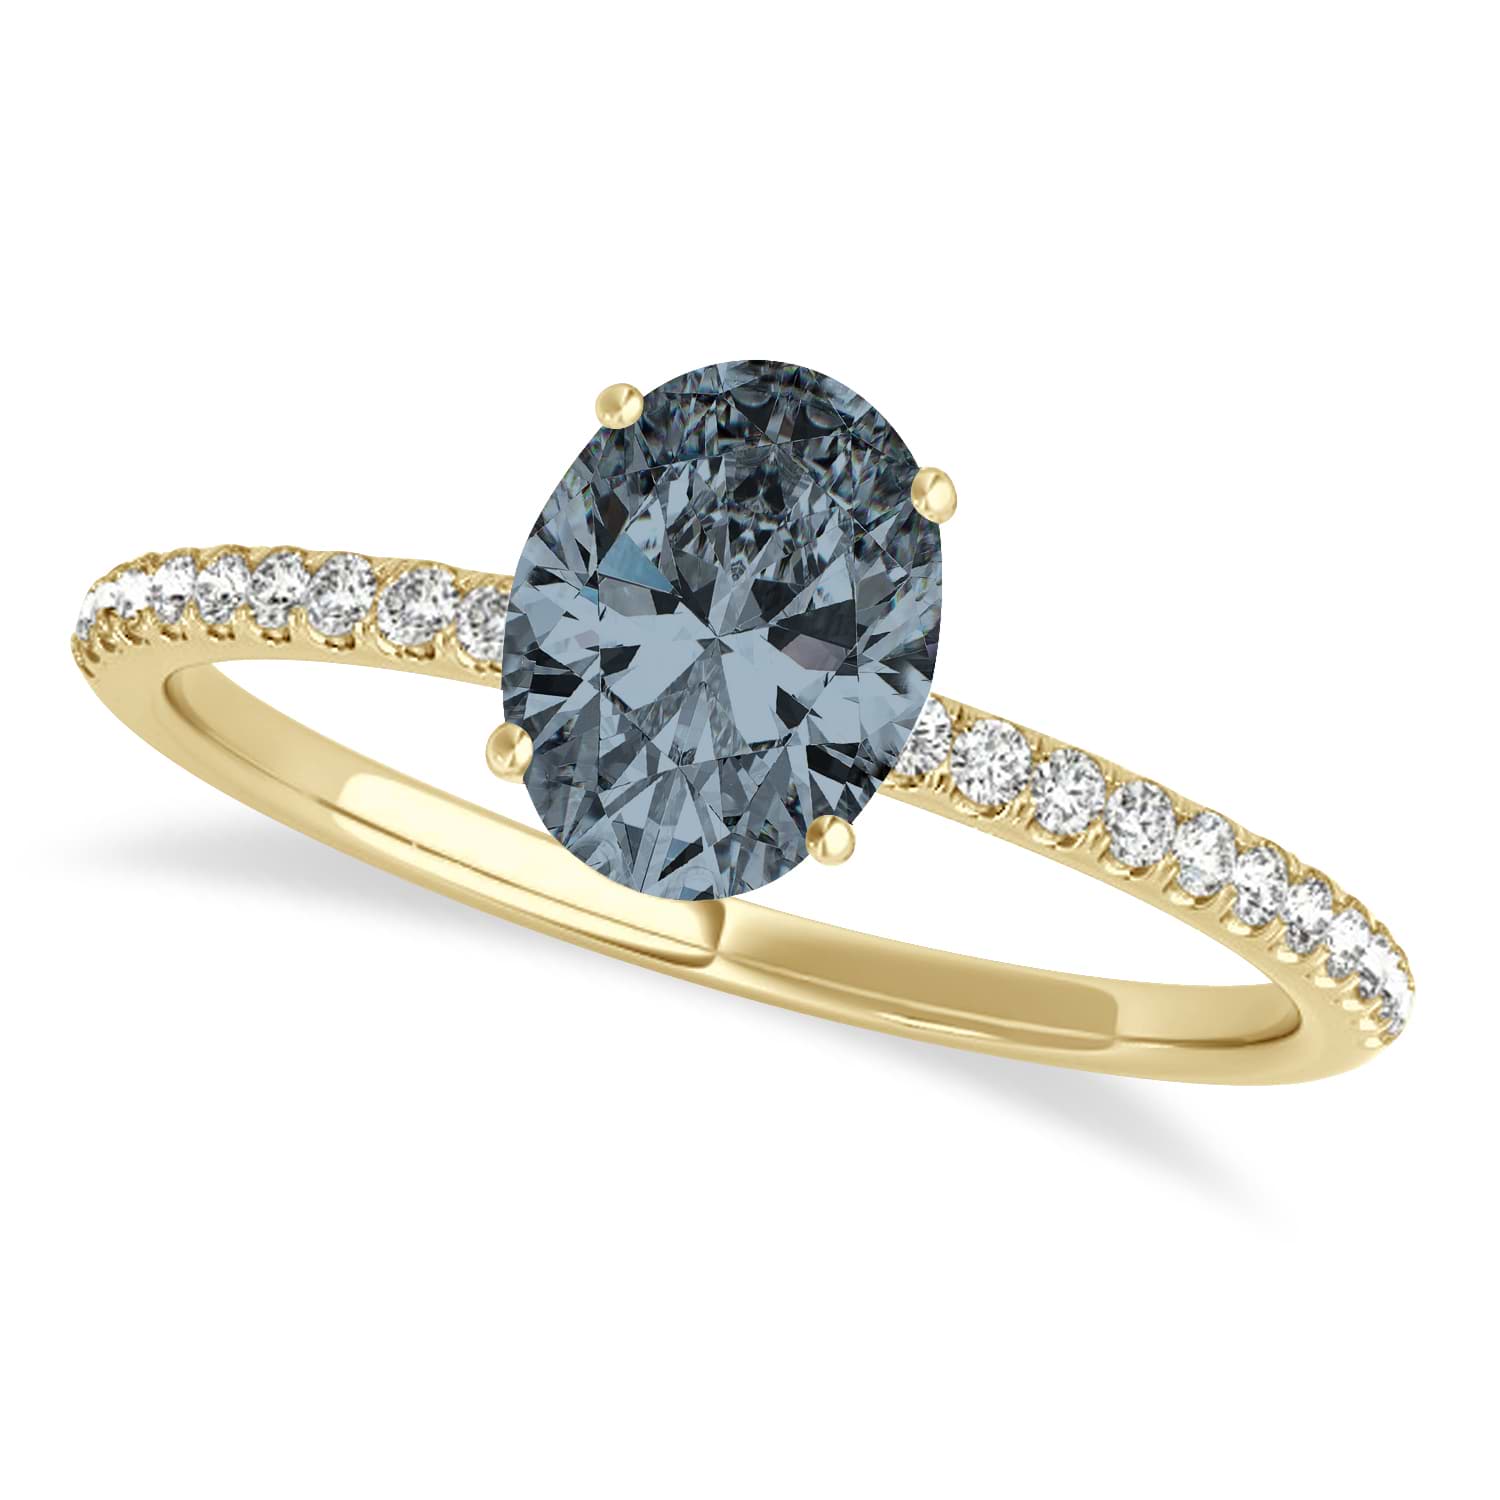 Gray Spinel & Diamond Accented Oval Shape Engagement Ring 18k Yellow Gold (3.00ct)